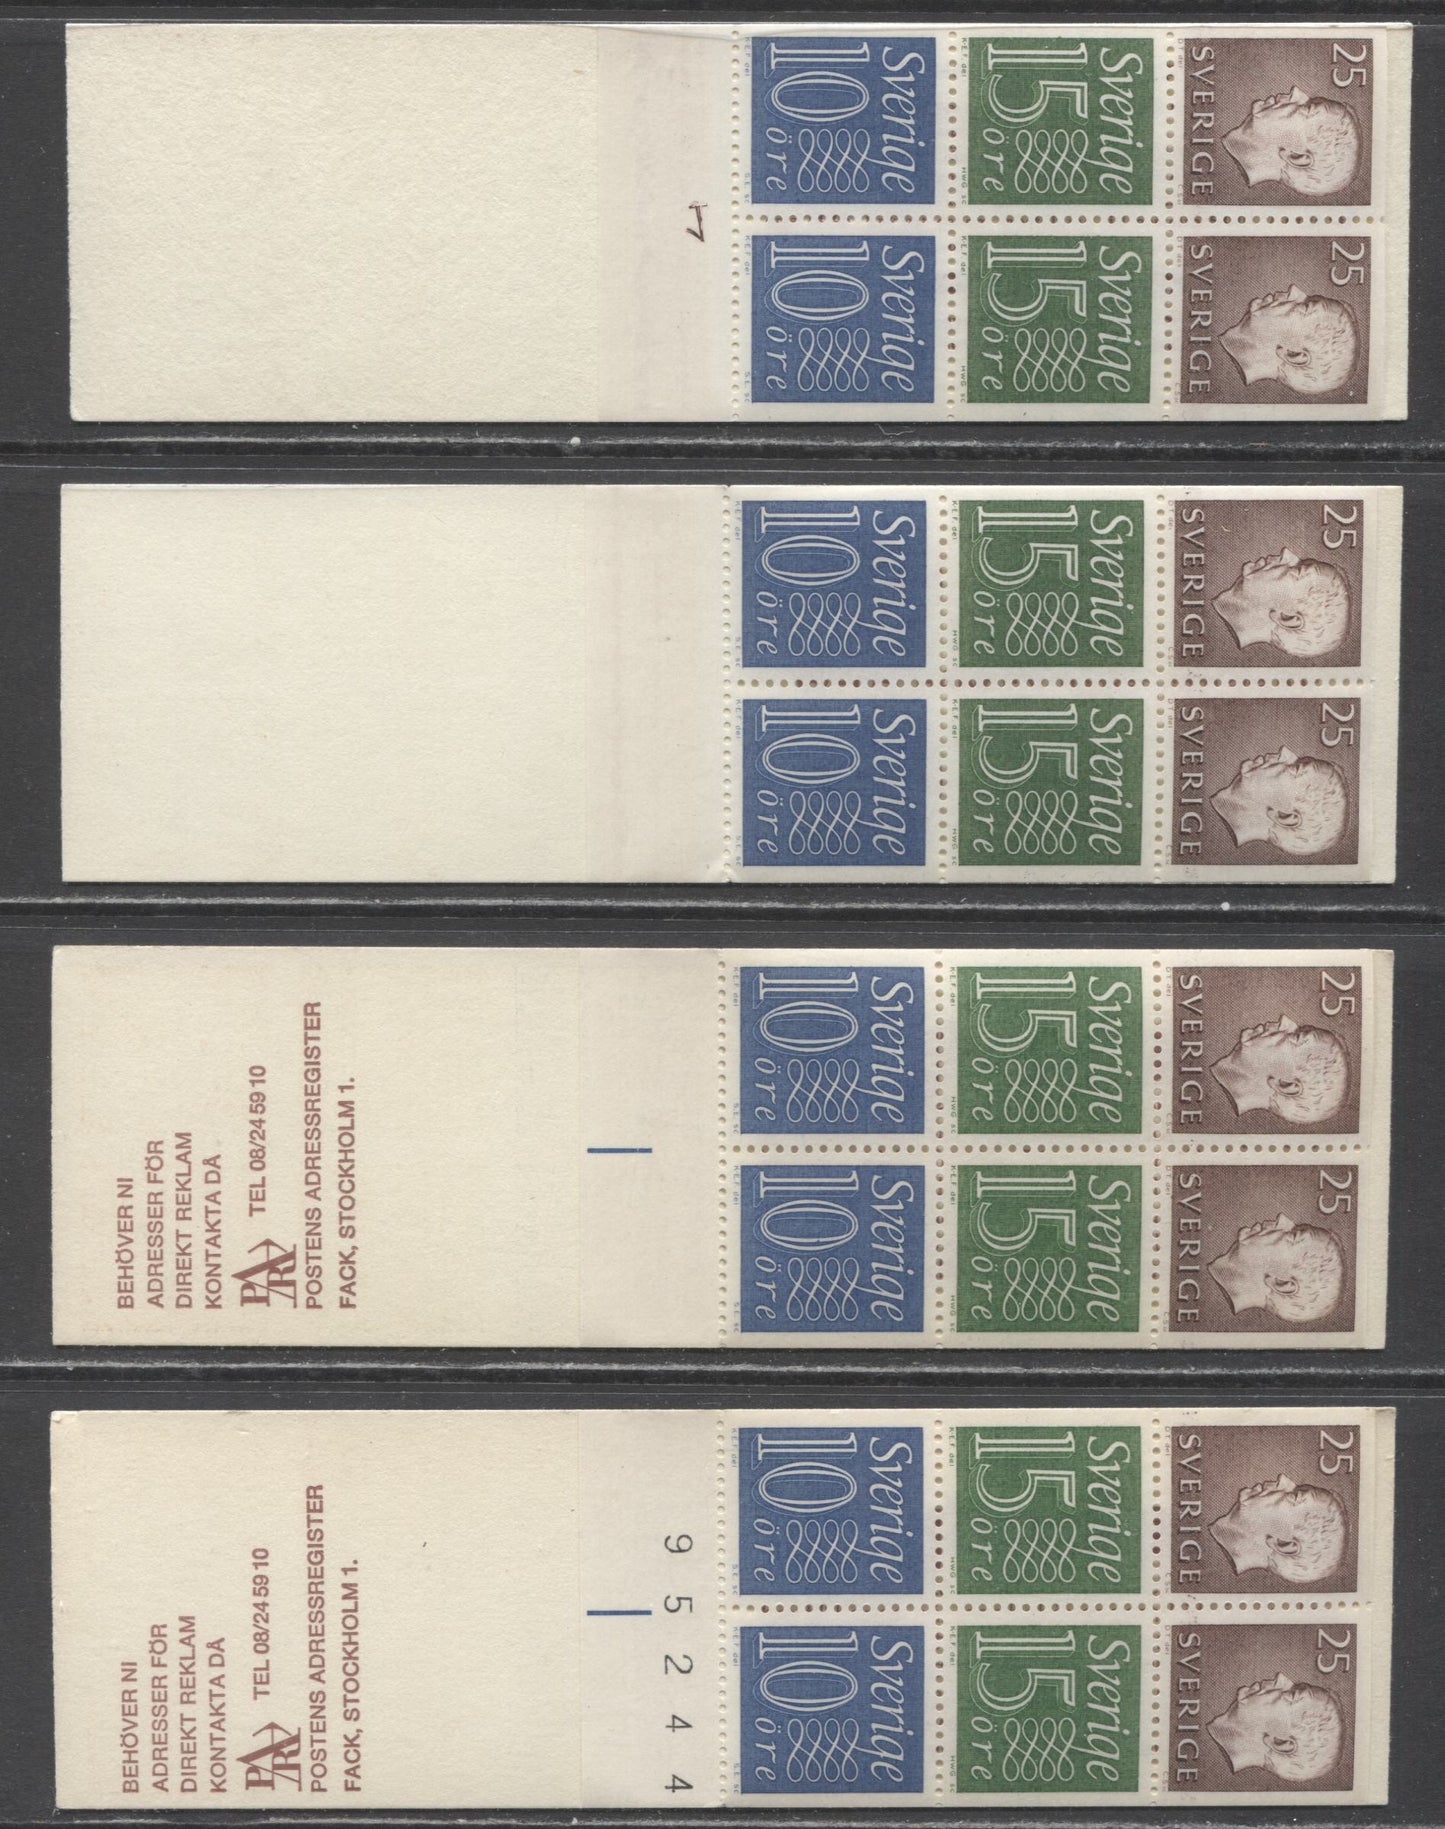 Lot 151 Sweden SC#580a (Facit #HA14C2AO/FO) 1965-1966 Re-Engraved King Gustav VI Adolf Definitive Issue, All Different With Respect to Back Cover Design, Or Selvedge Markings, Different From Lot 149, 4 VFNH Booklets of 6 (2 +2+2), Estimated Value $21